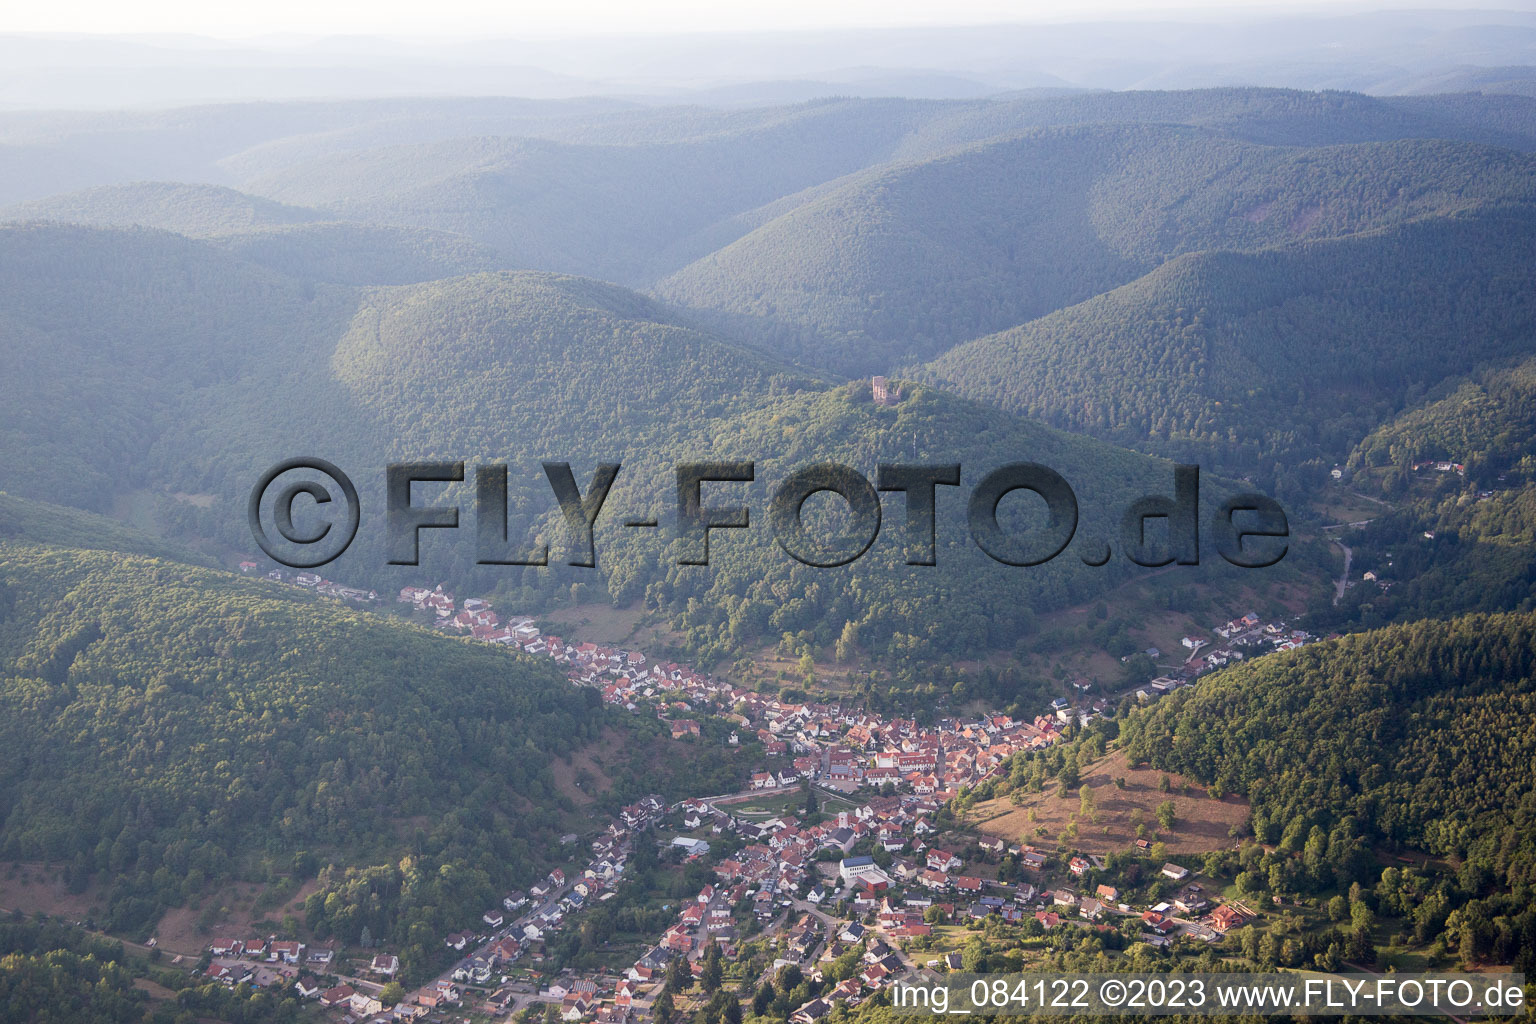 Ramberg in the state Rhineland-Palatinate, Germany from the plane